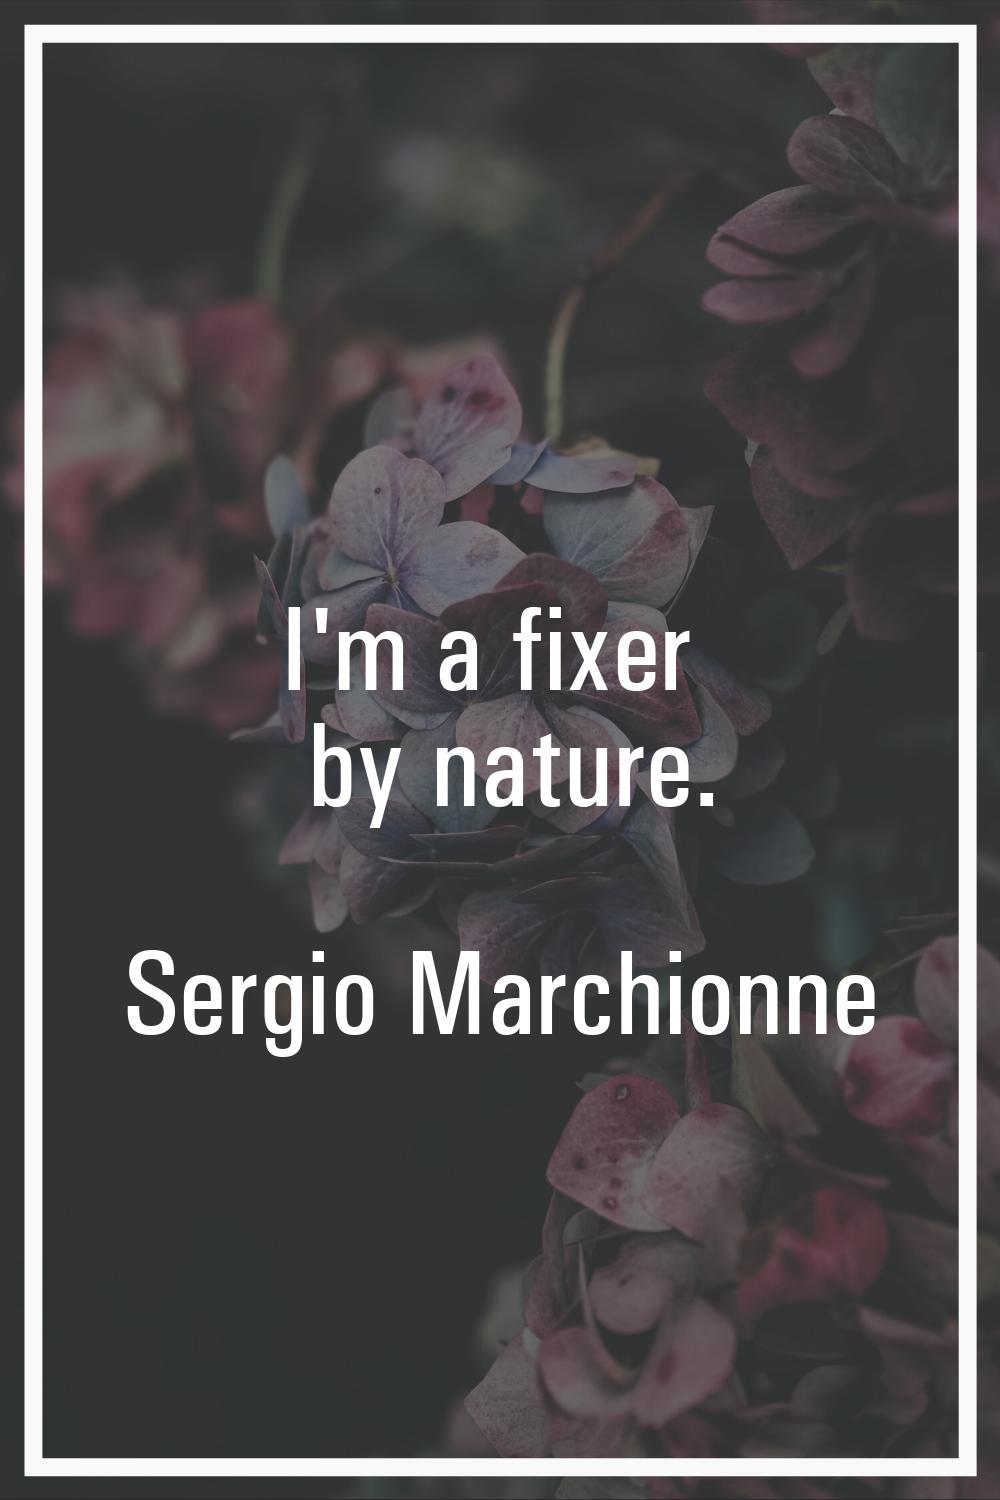 I'm a fixer by nature.